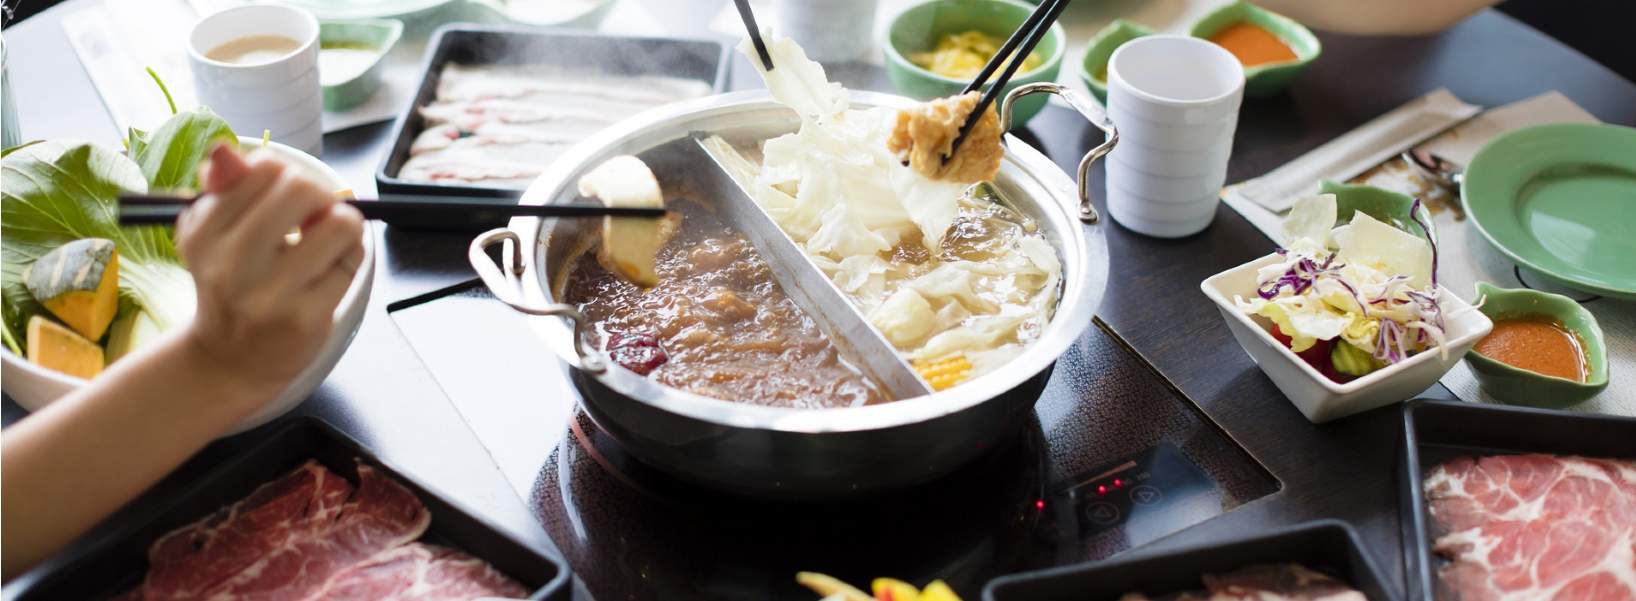 This rise of ‘DIY’ and hotpot restaurants in London